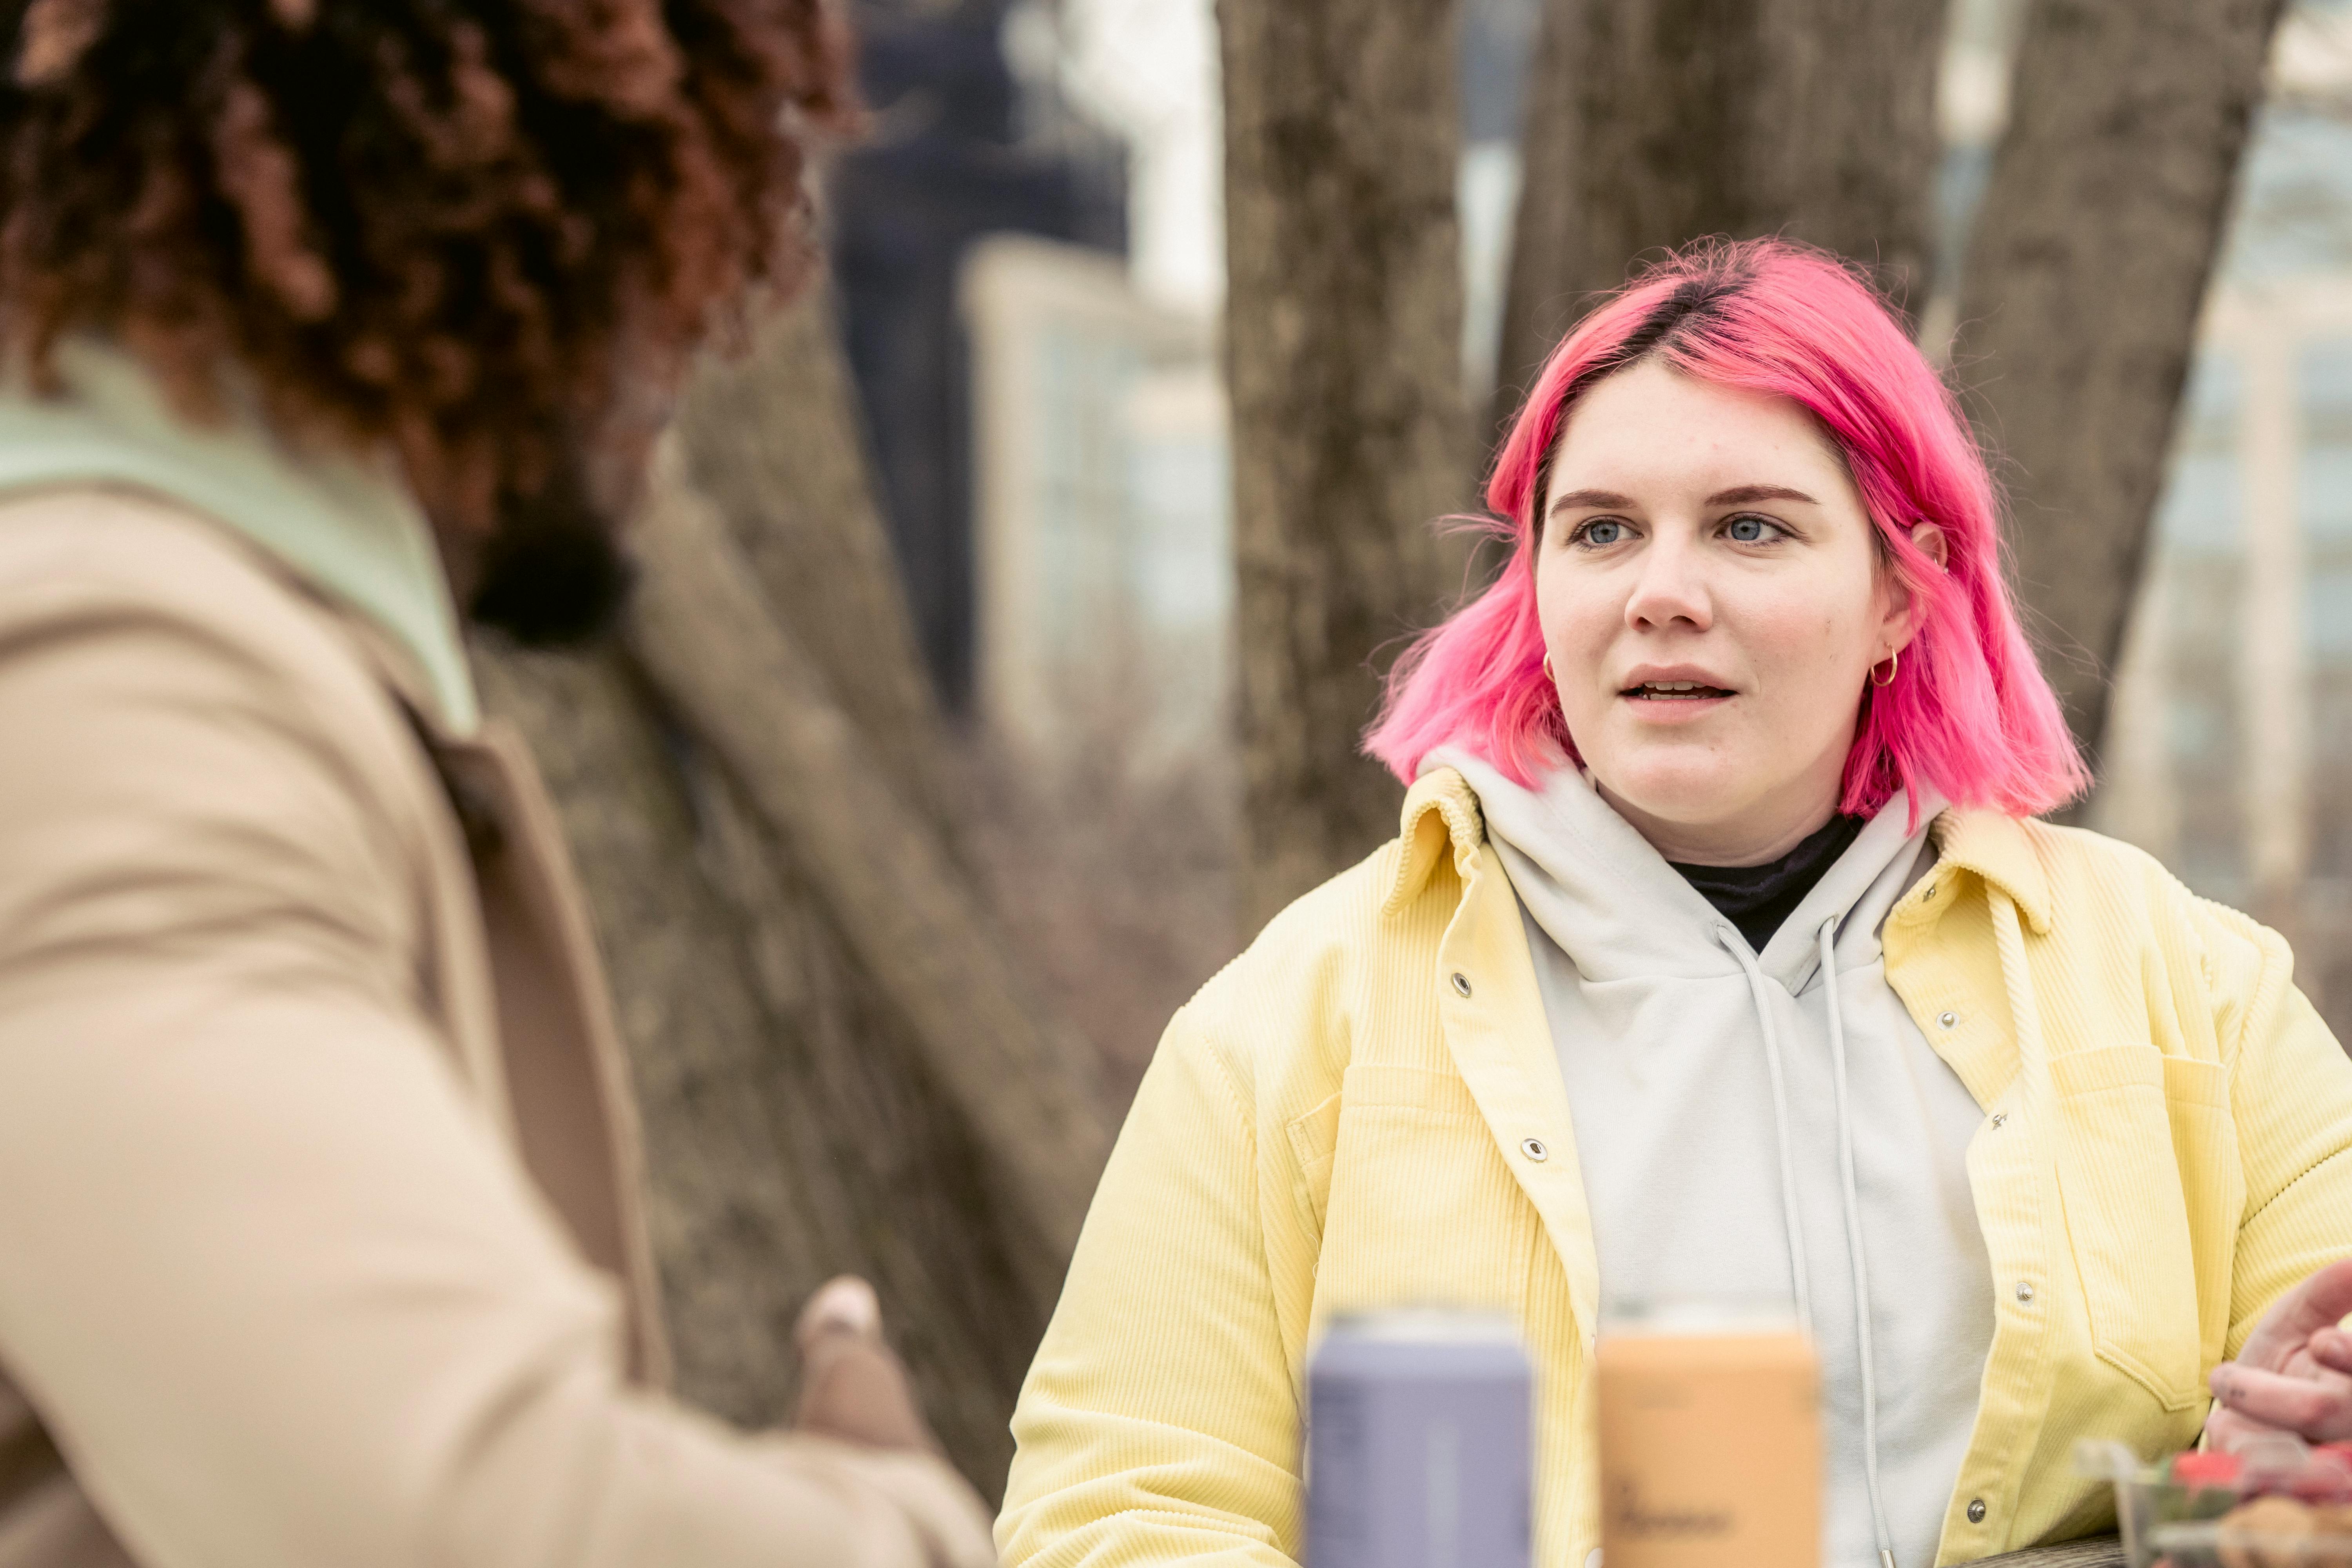 A unhappy-looking woman talking to someone | Source: Pexels